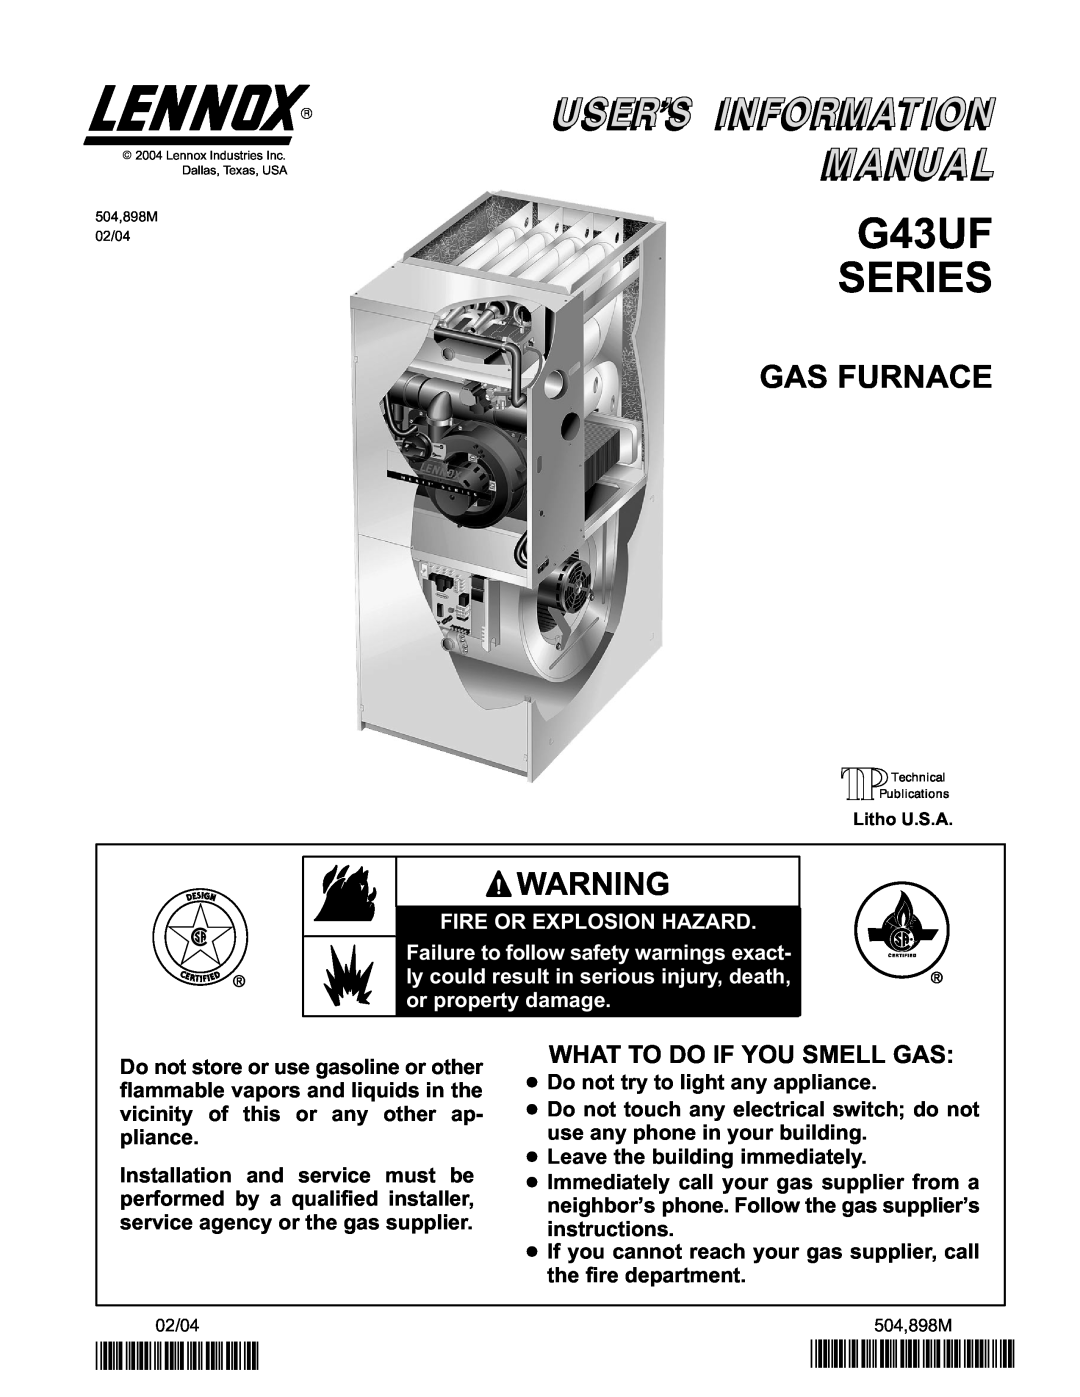 Lennox International Inc manual G43UF SERIES, Gas Furnace, 2P0204, P504898M, What To Do If You Smell Gas 